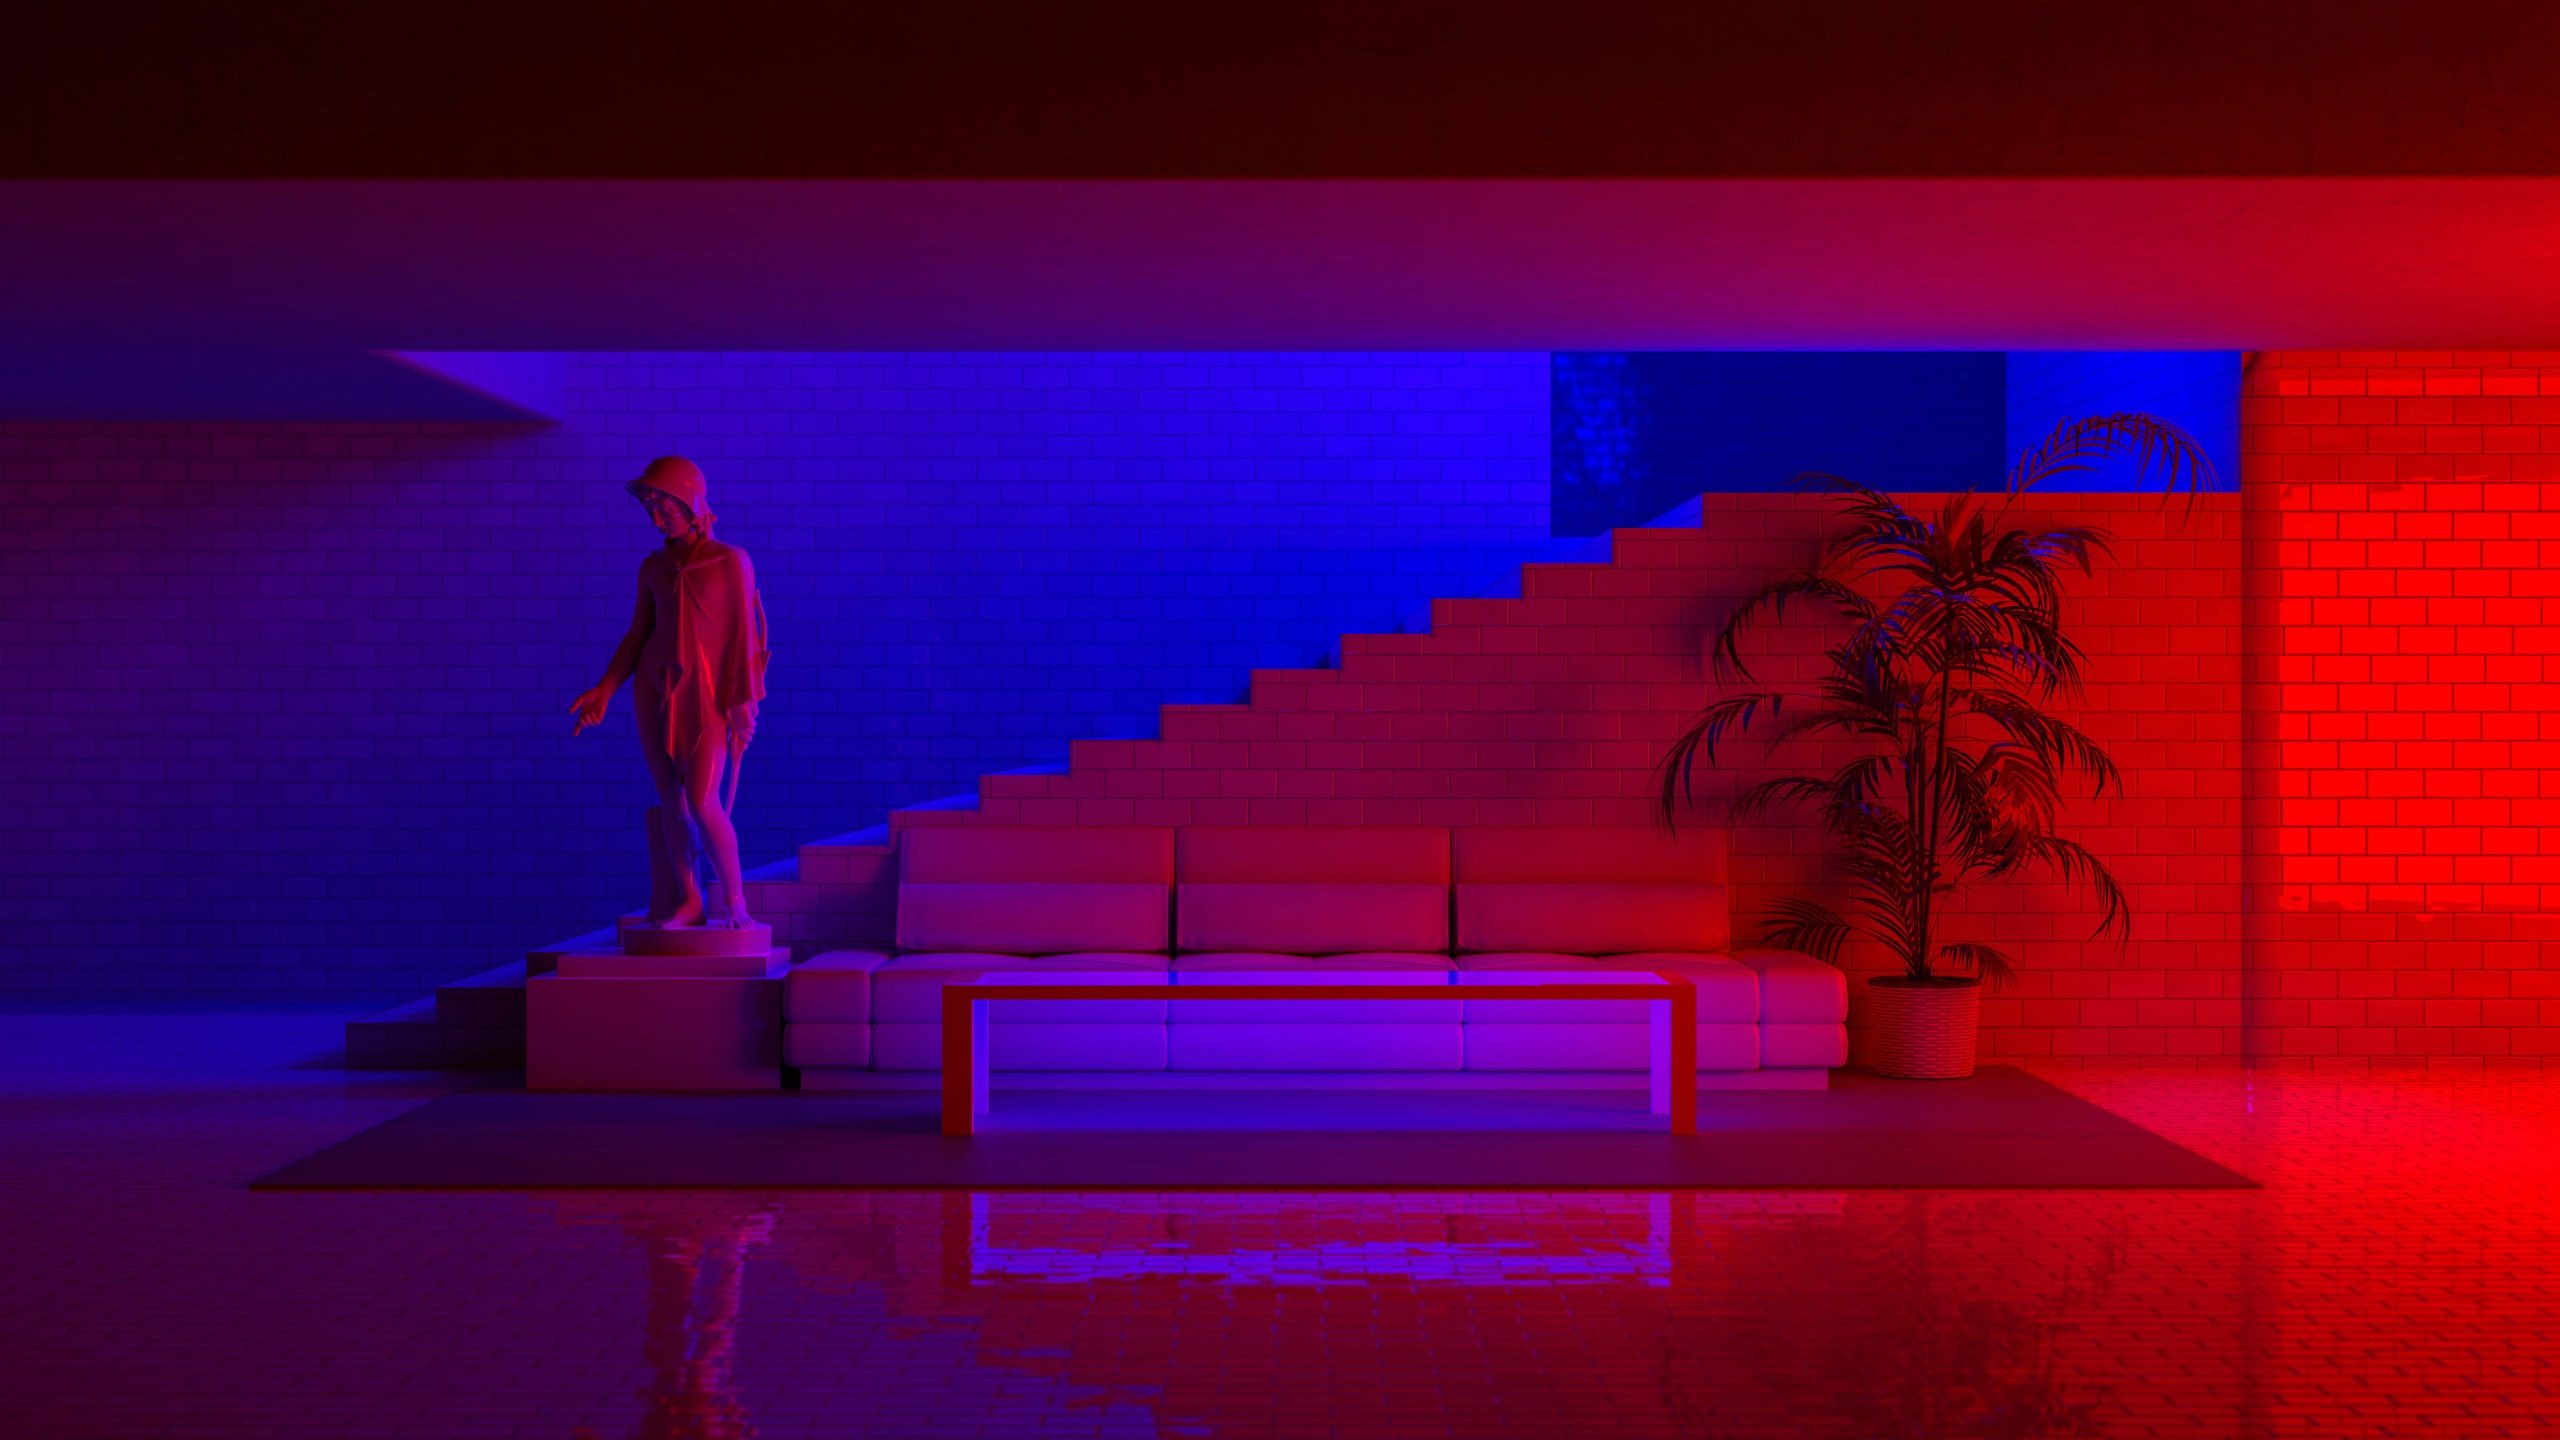 A room with red and blue lighting - Neon red